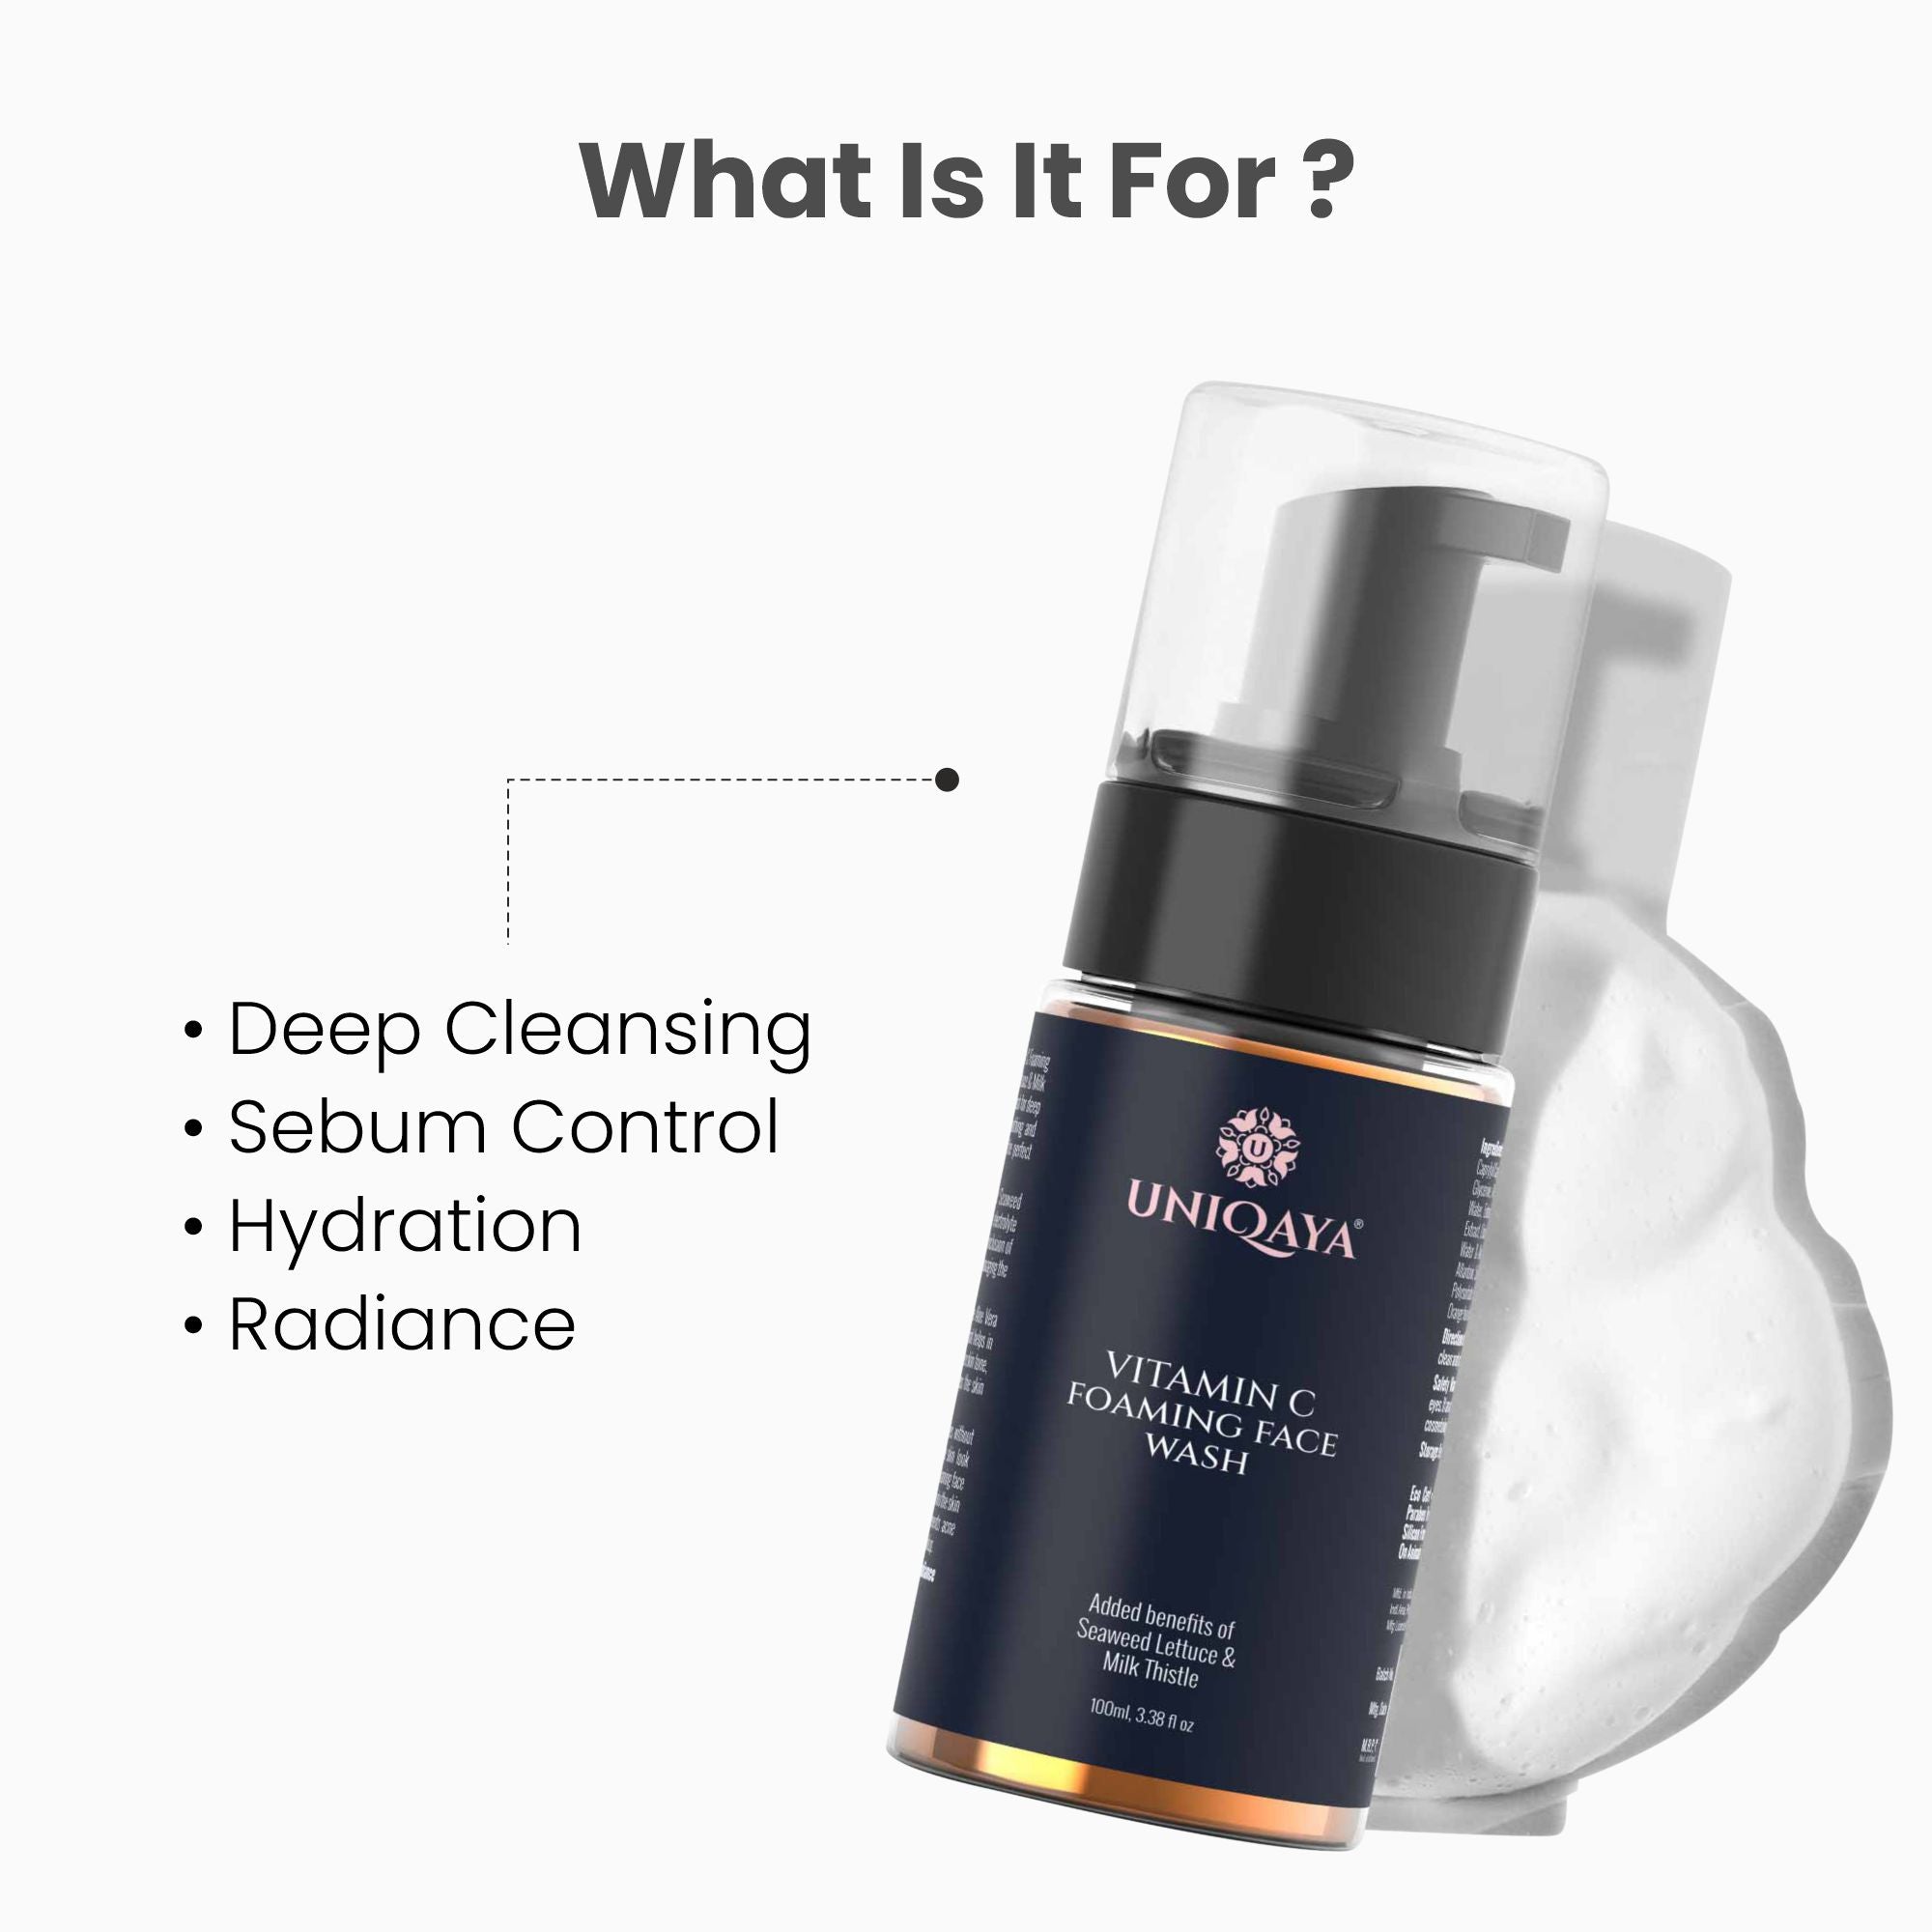 Uniqaya Vitamin C Foaming Face Wash What Is It For?